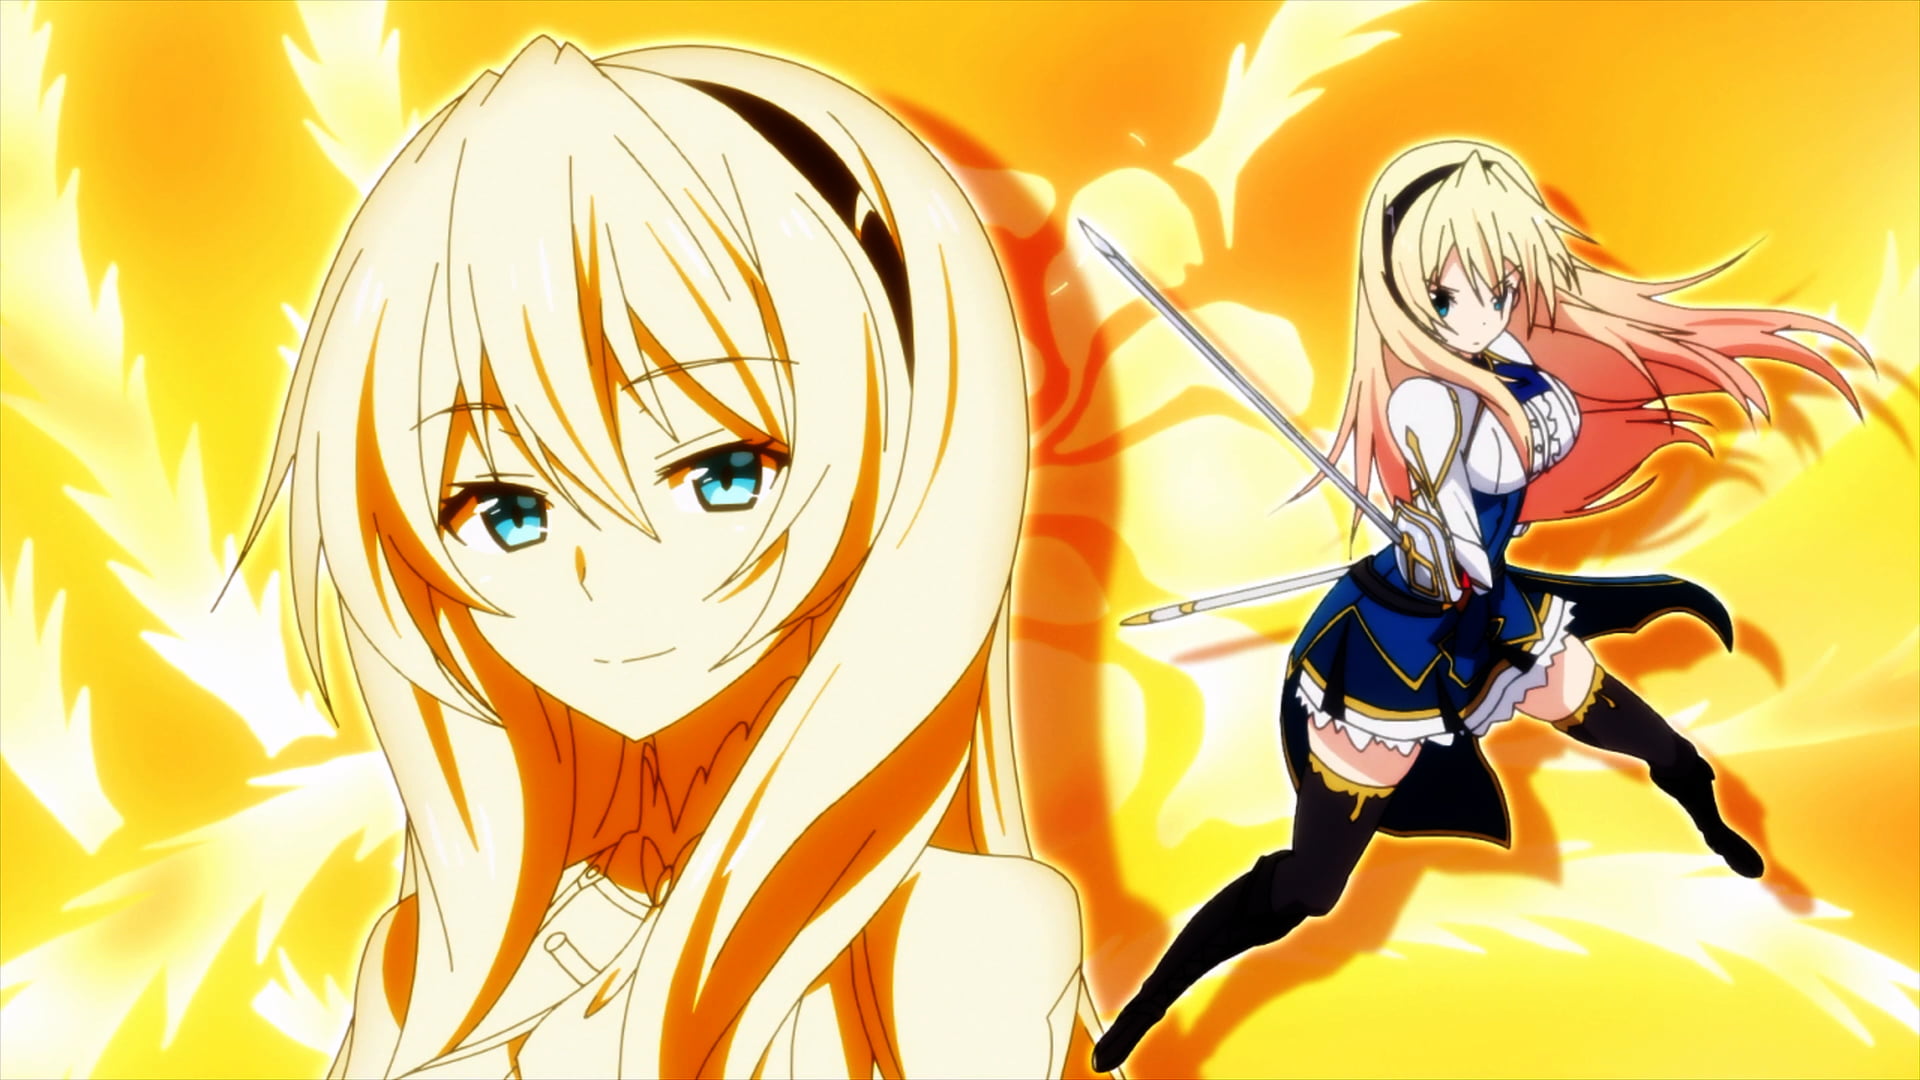 10. "Anime Characters with Blonde Hair and Zippers" - wide 9